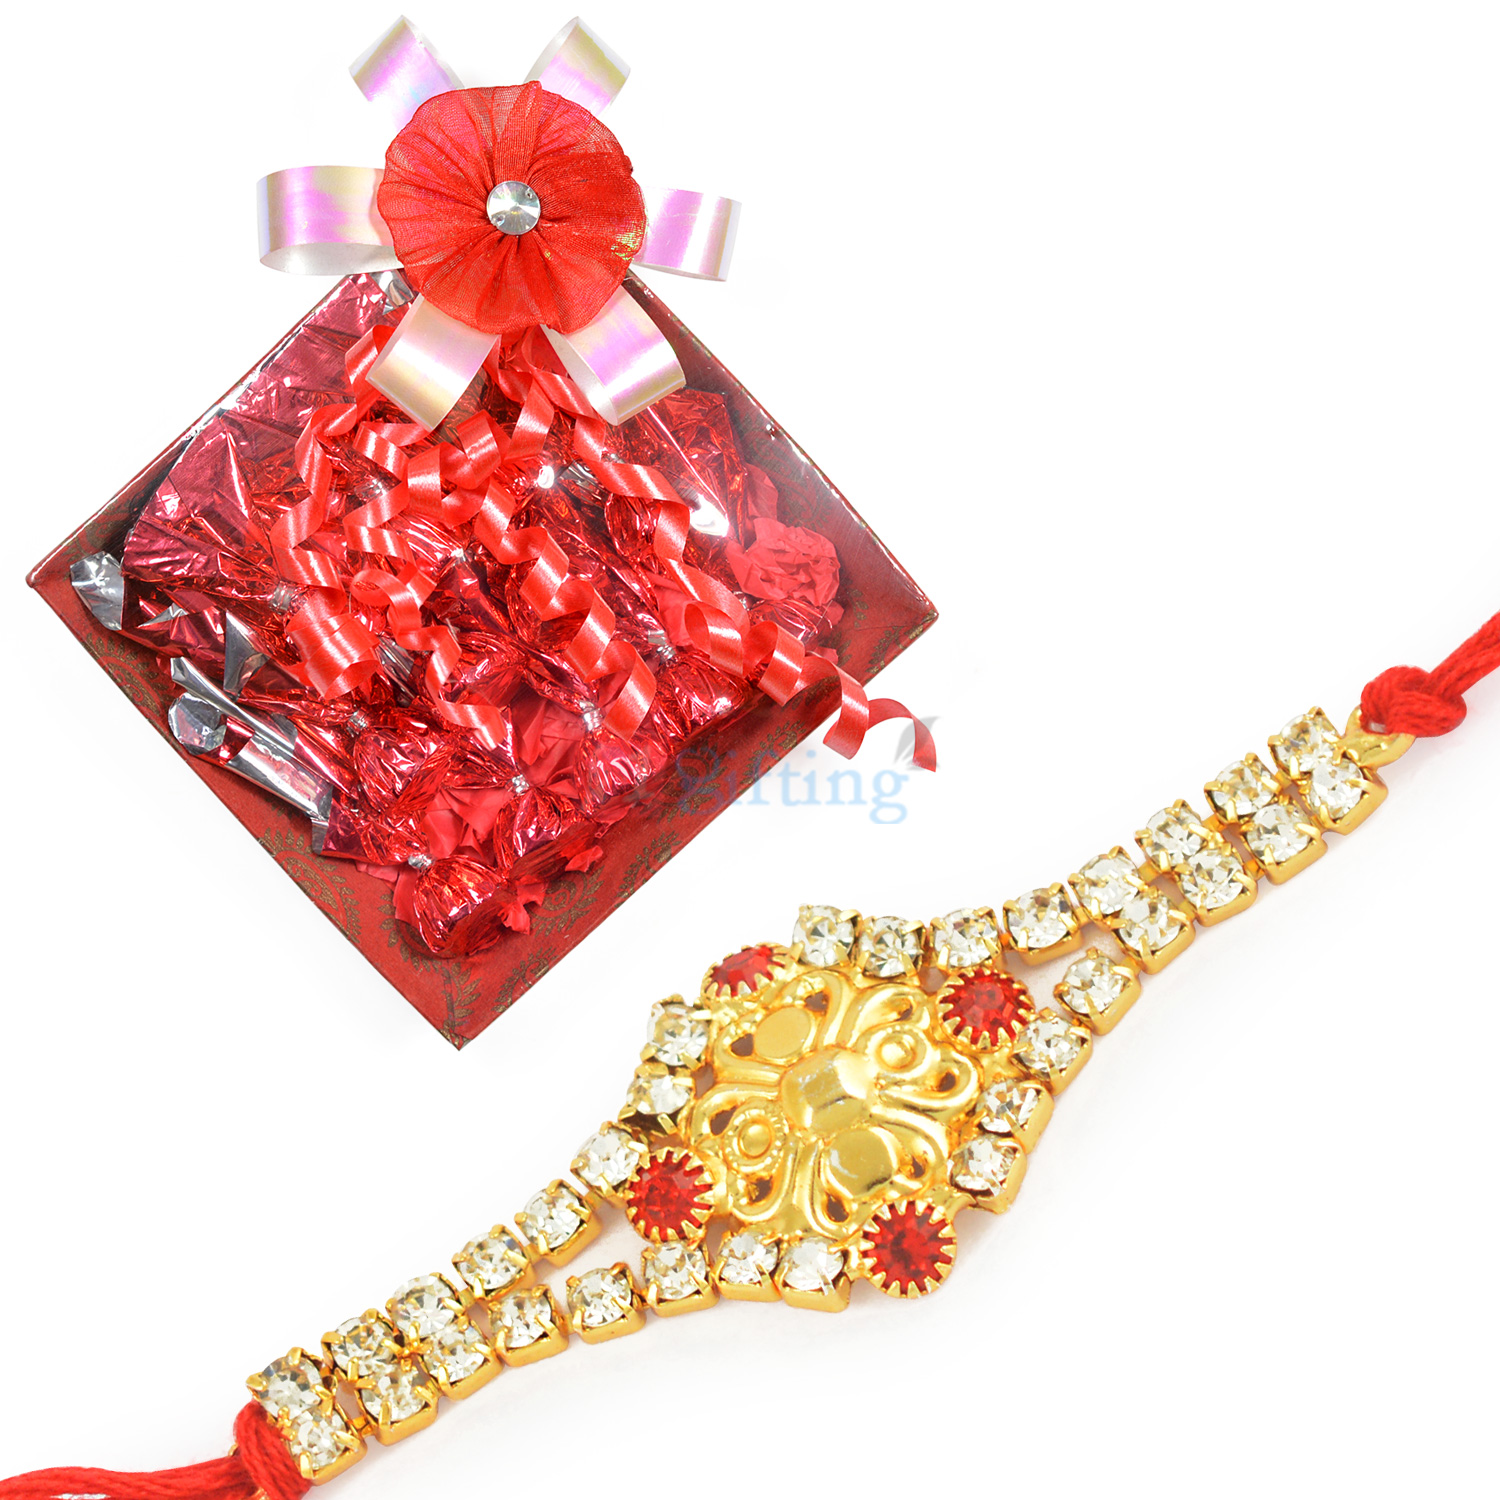 Special Golden Fancy Diamond Rakhi with Red Homemade Chocolate Box